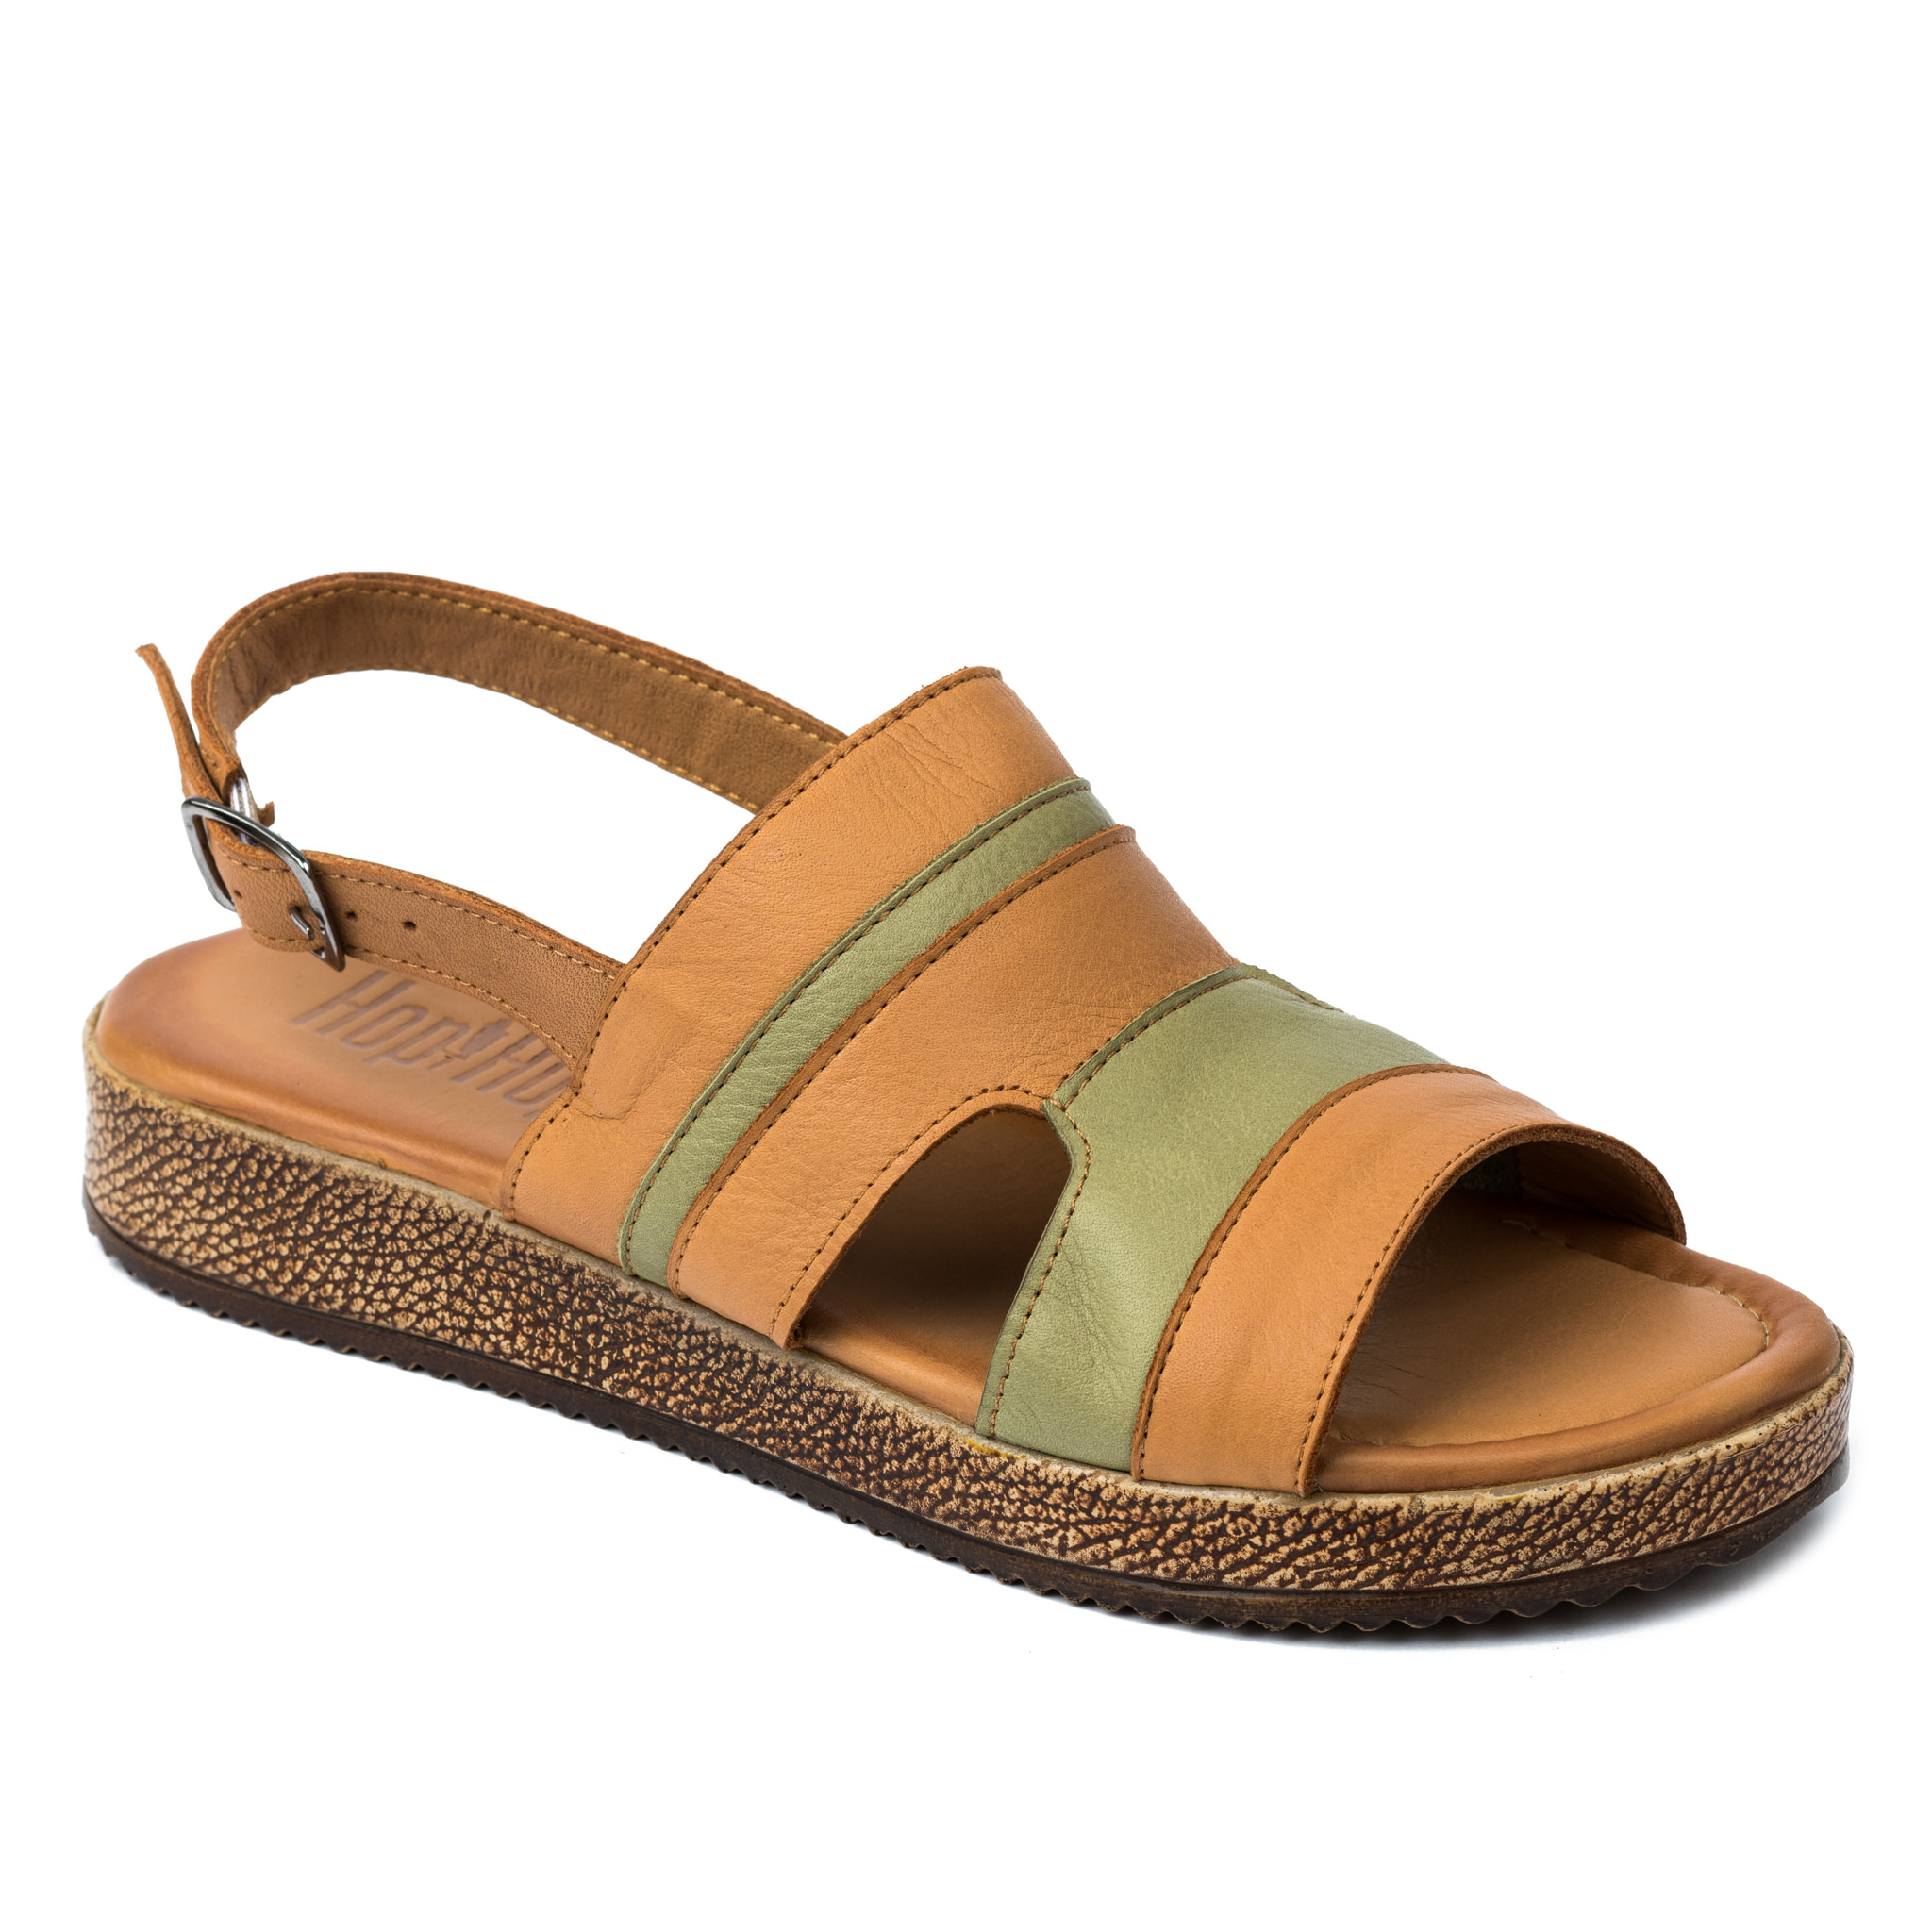 Leather sandals A699 - GREEN